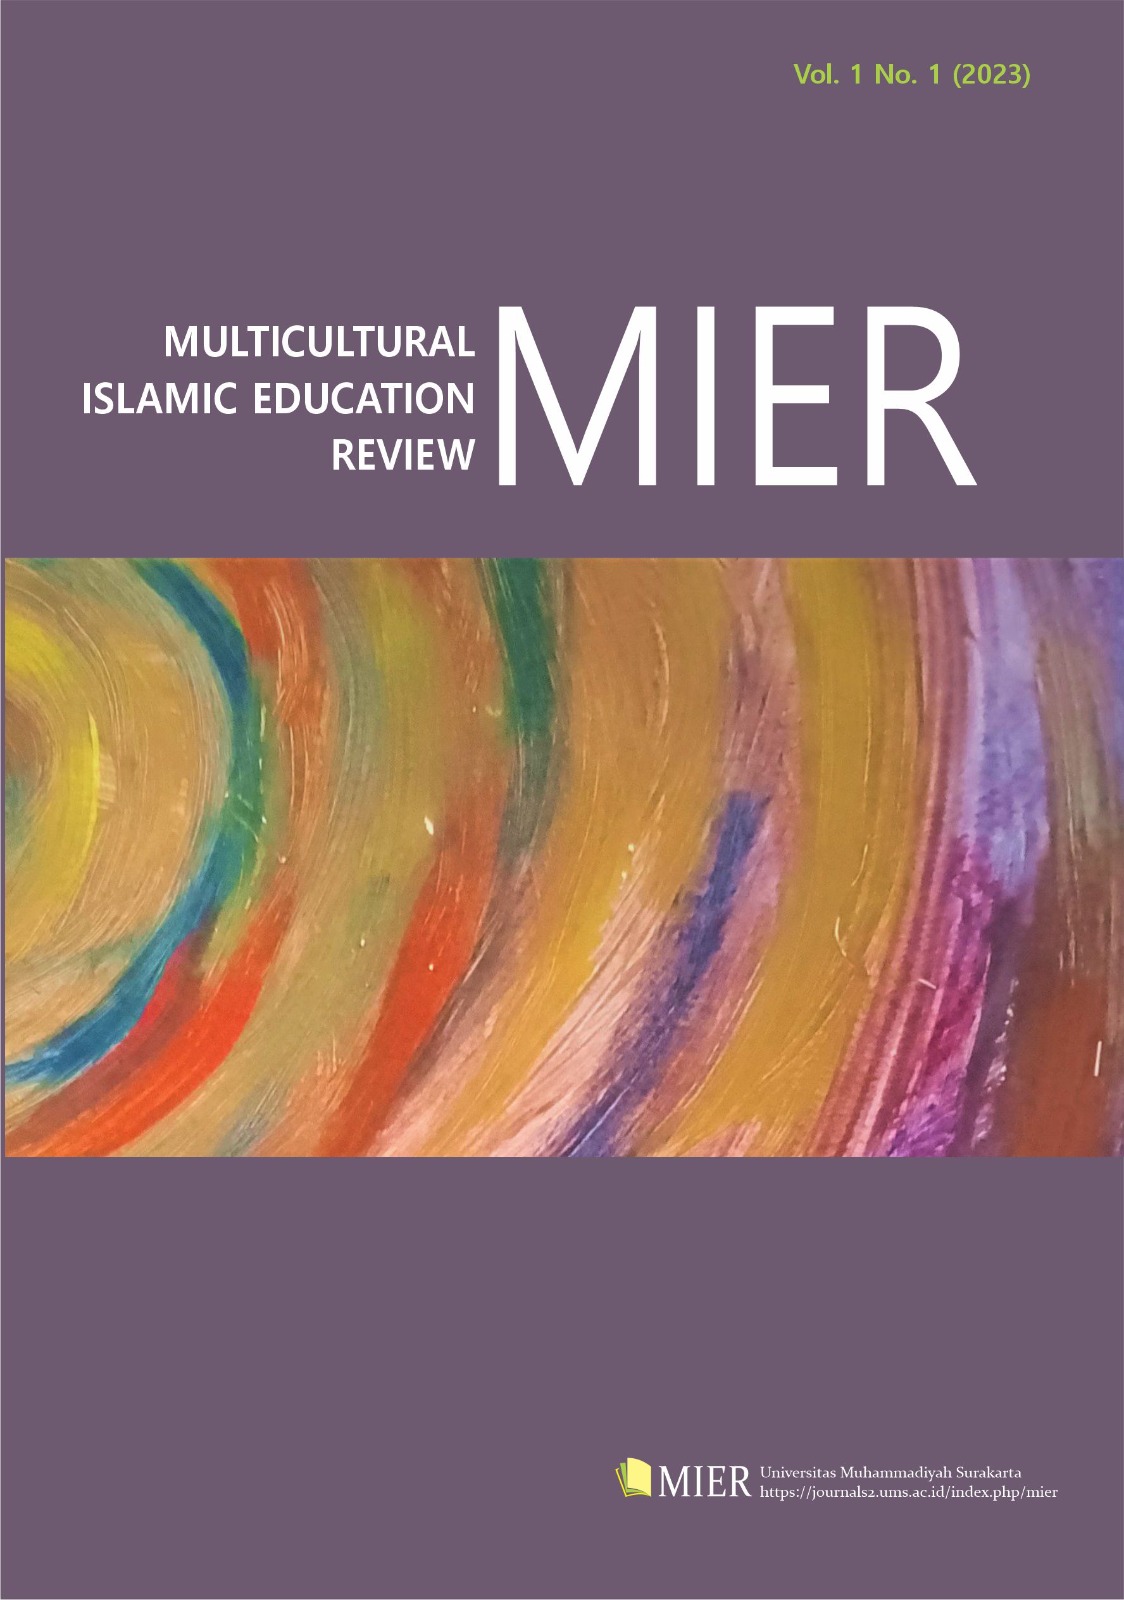 Multicultural Islamic Education Review